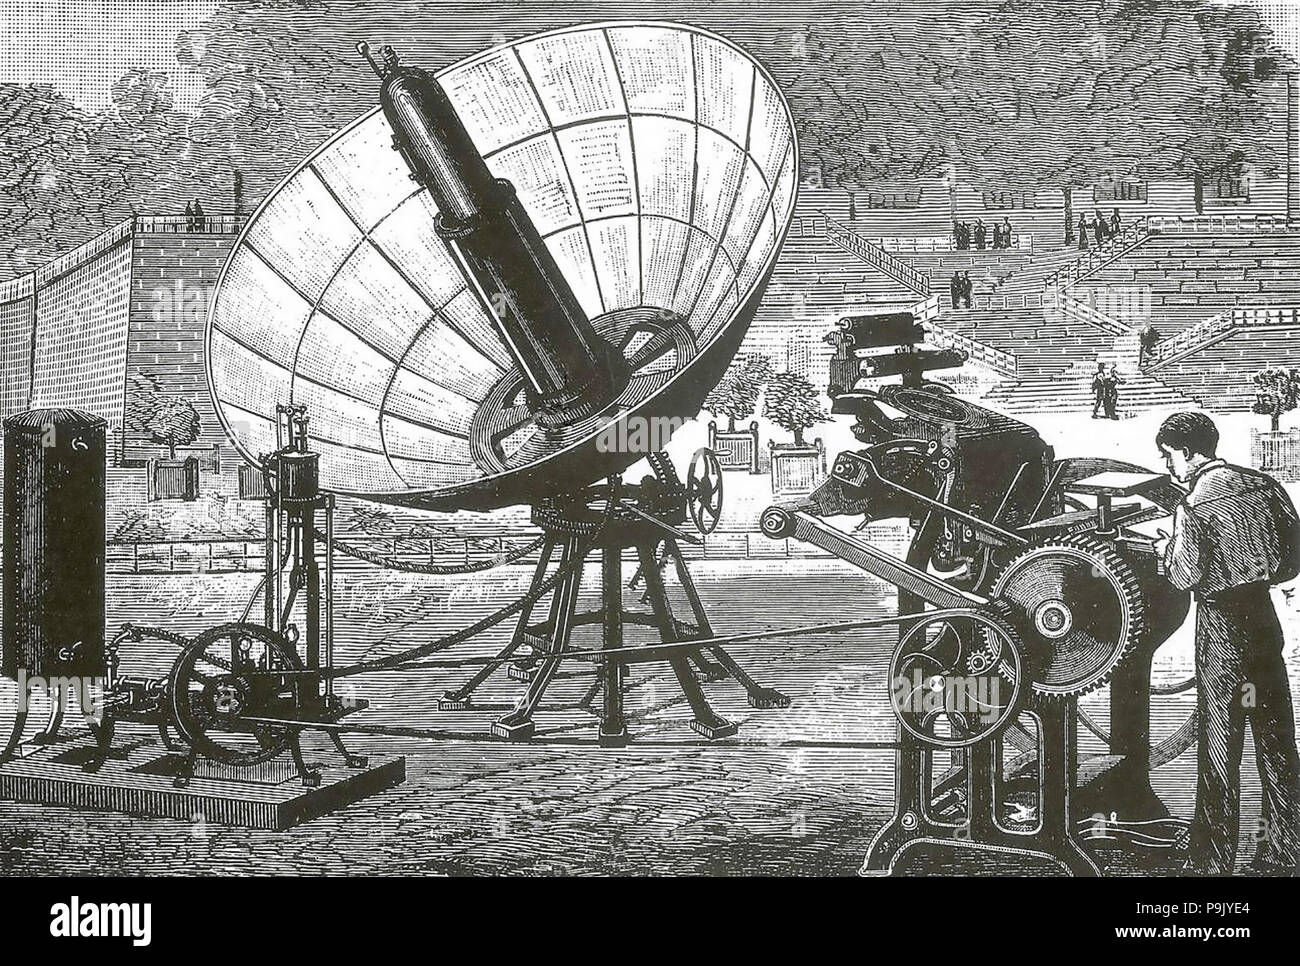 ABEL PIFRE (1852-1928) French engineer who developed the first solar printing press shown here in 1882 Stock Photo